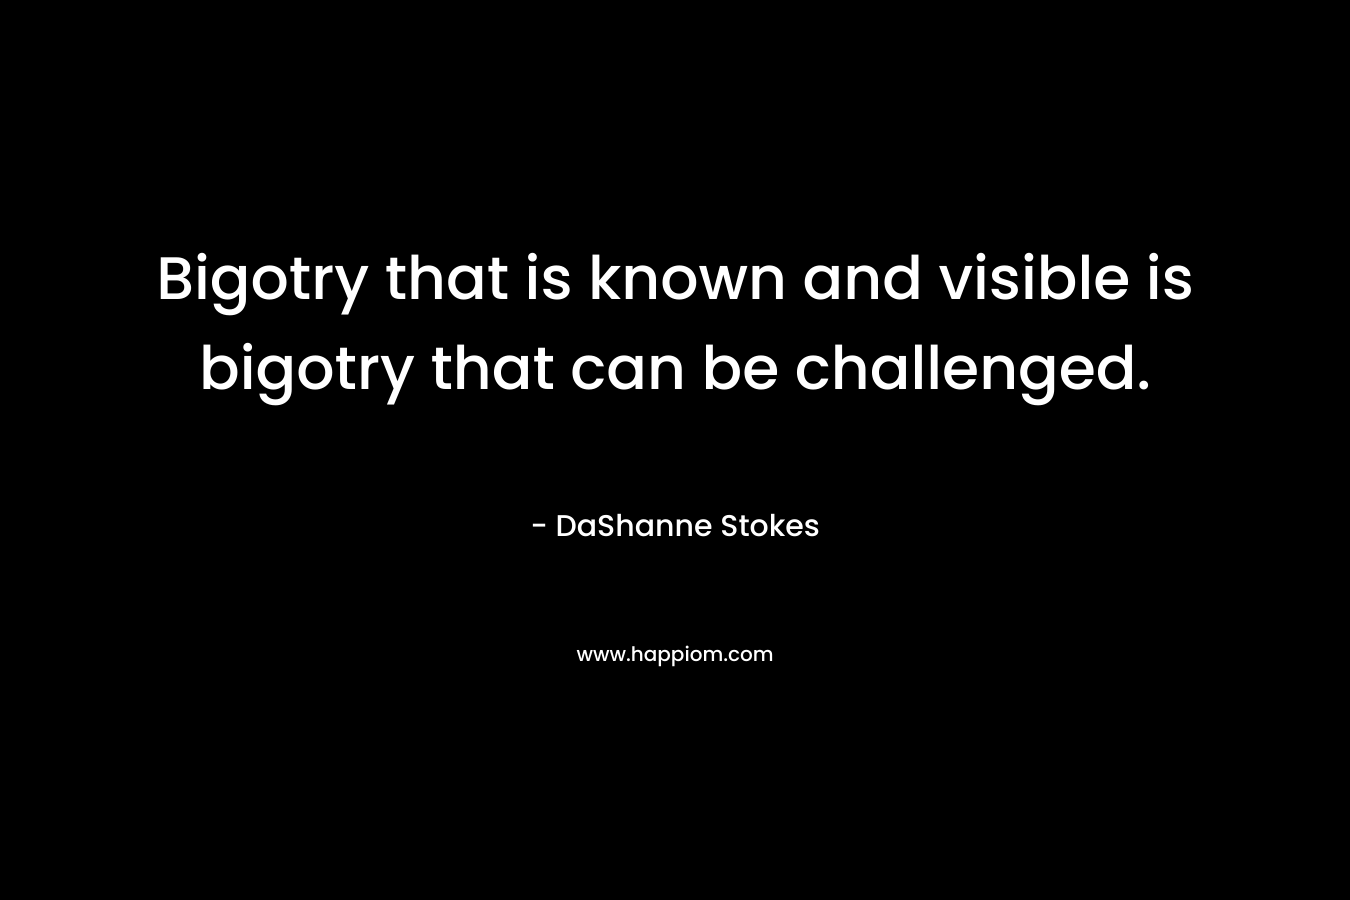 Bigotry that is known and visible is bigotry that can be challenged.